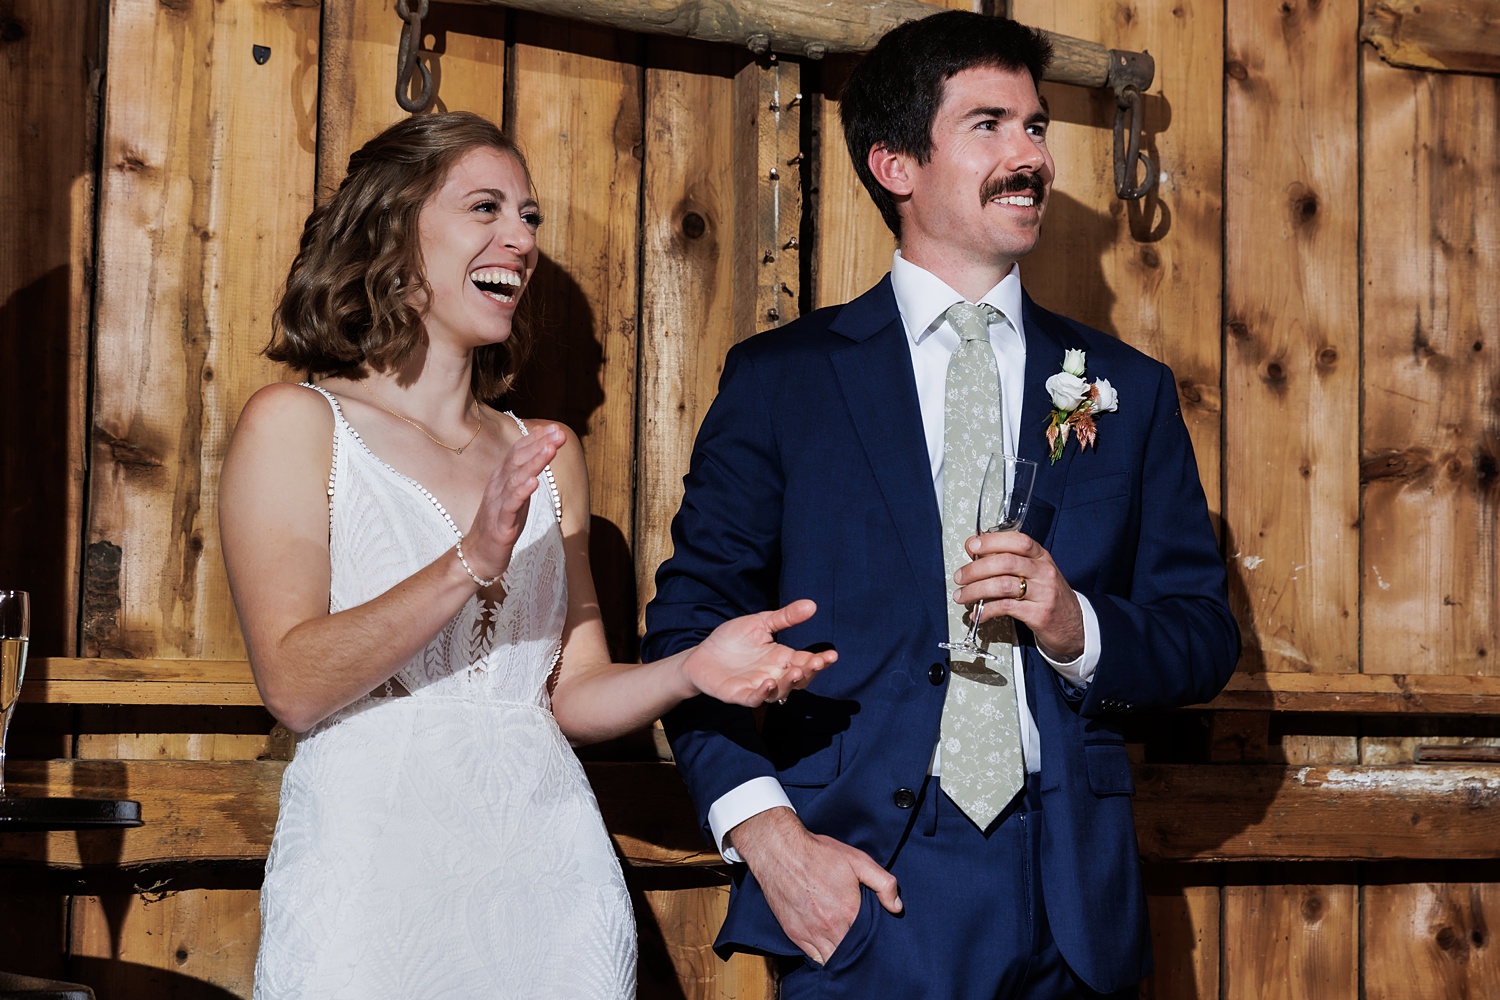 Laughing at toasts on the wedding day